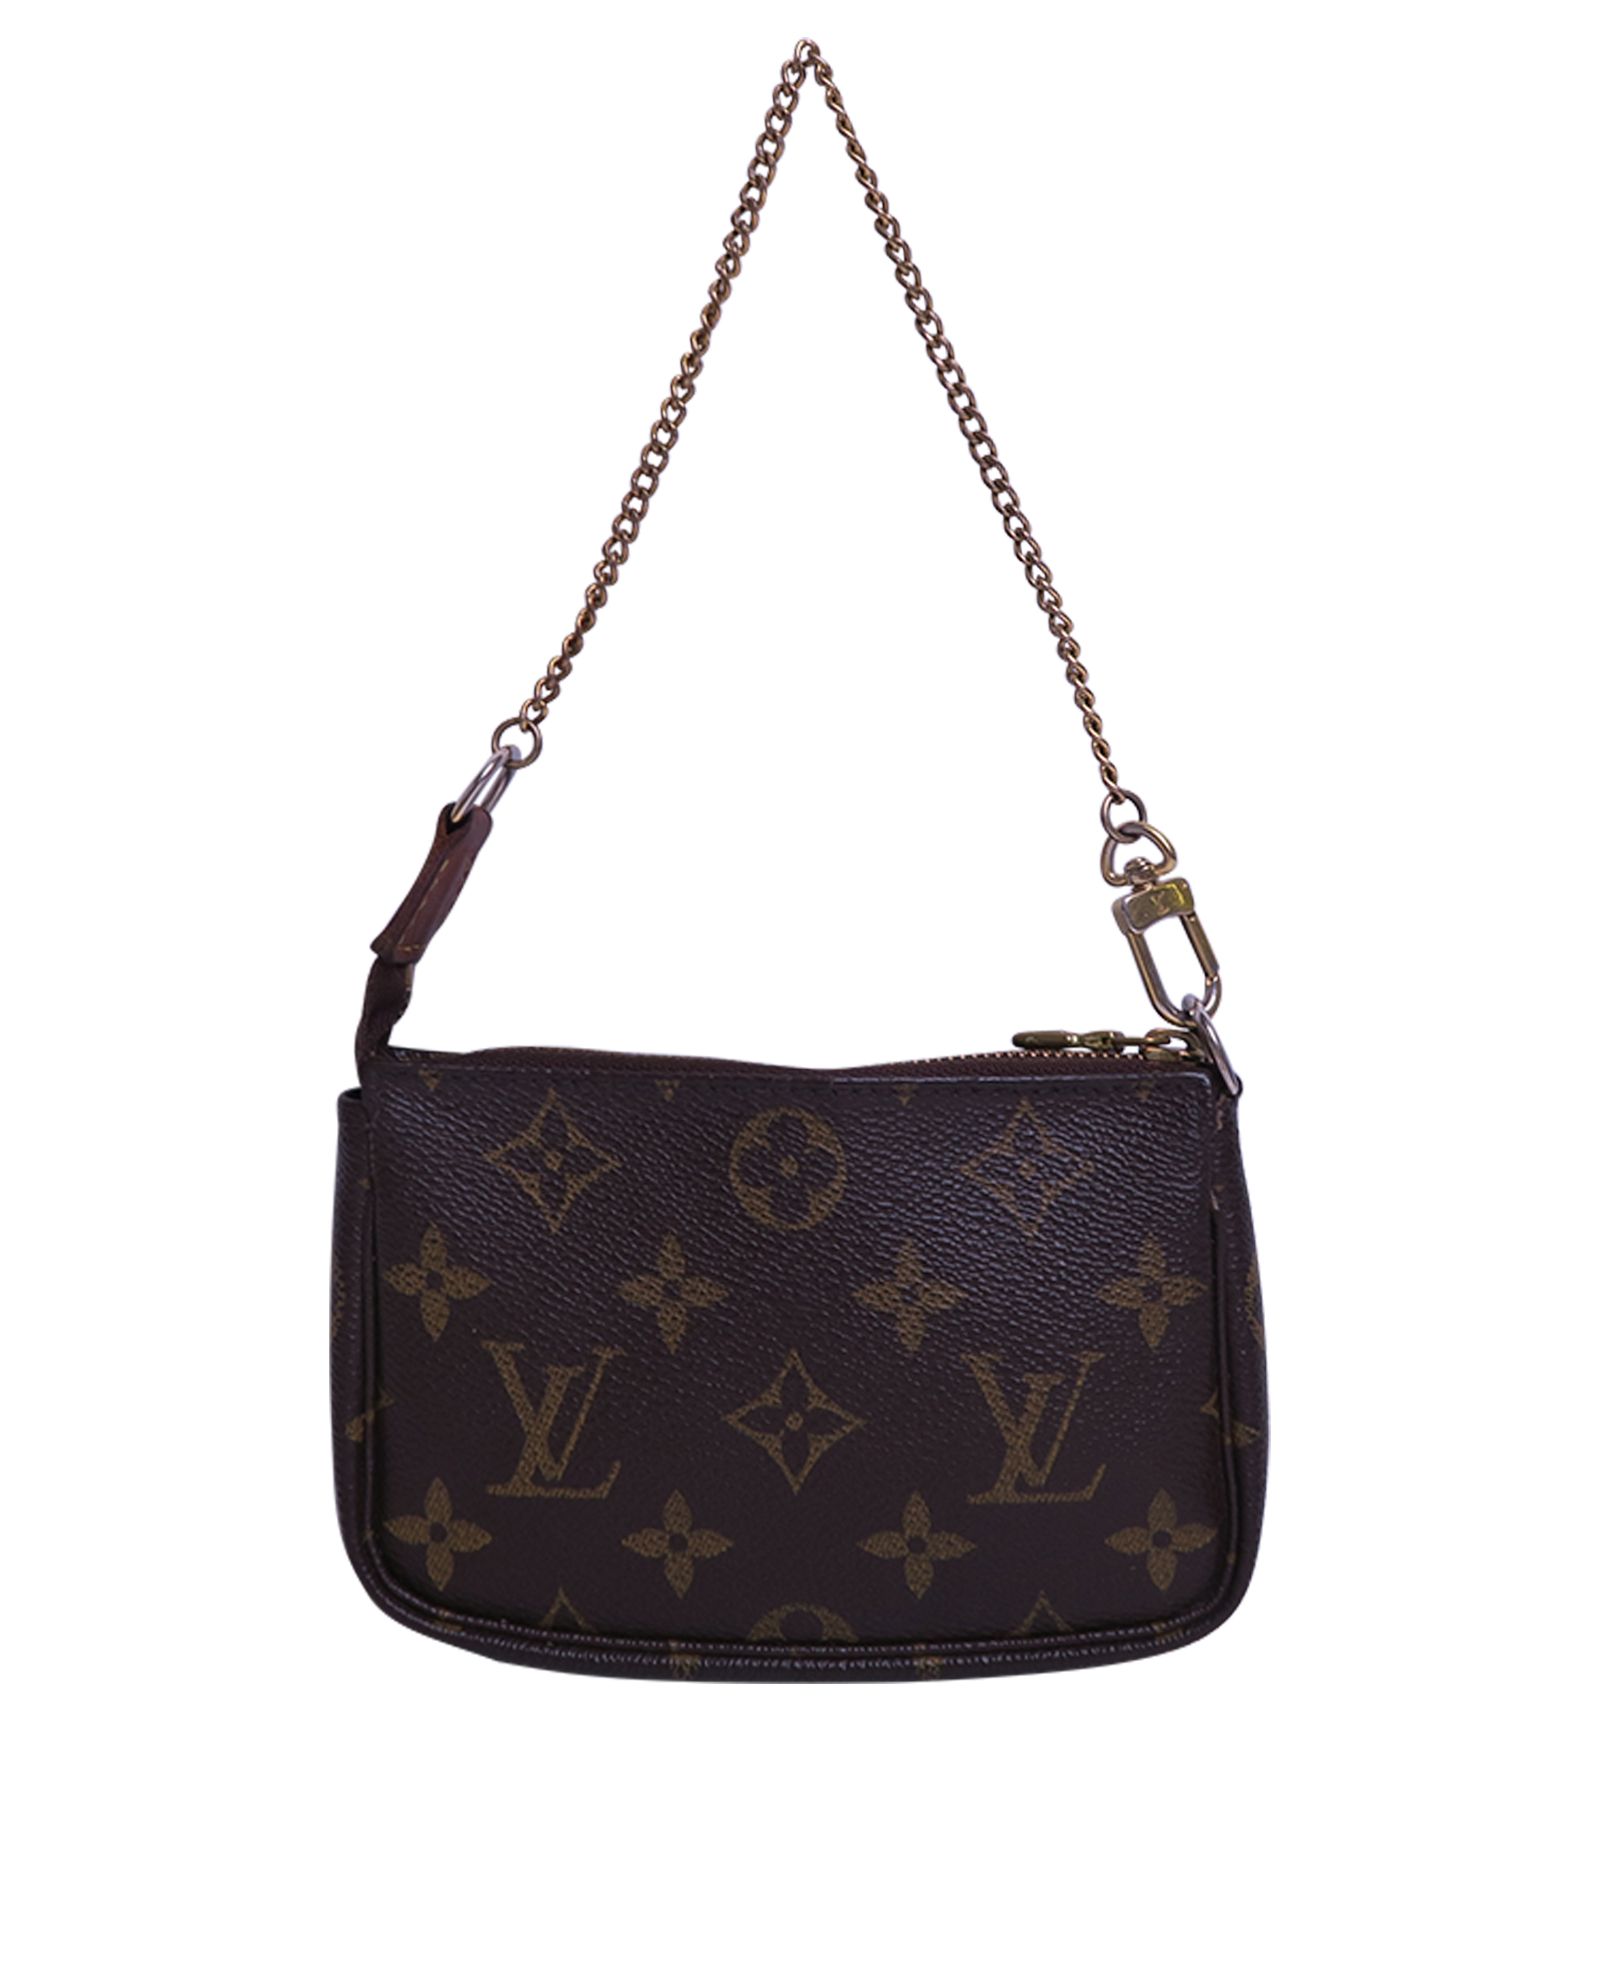 Louis Vuitton Neverfull Pochette Review and Unique Uses